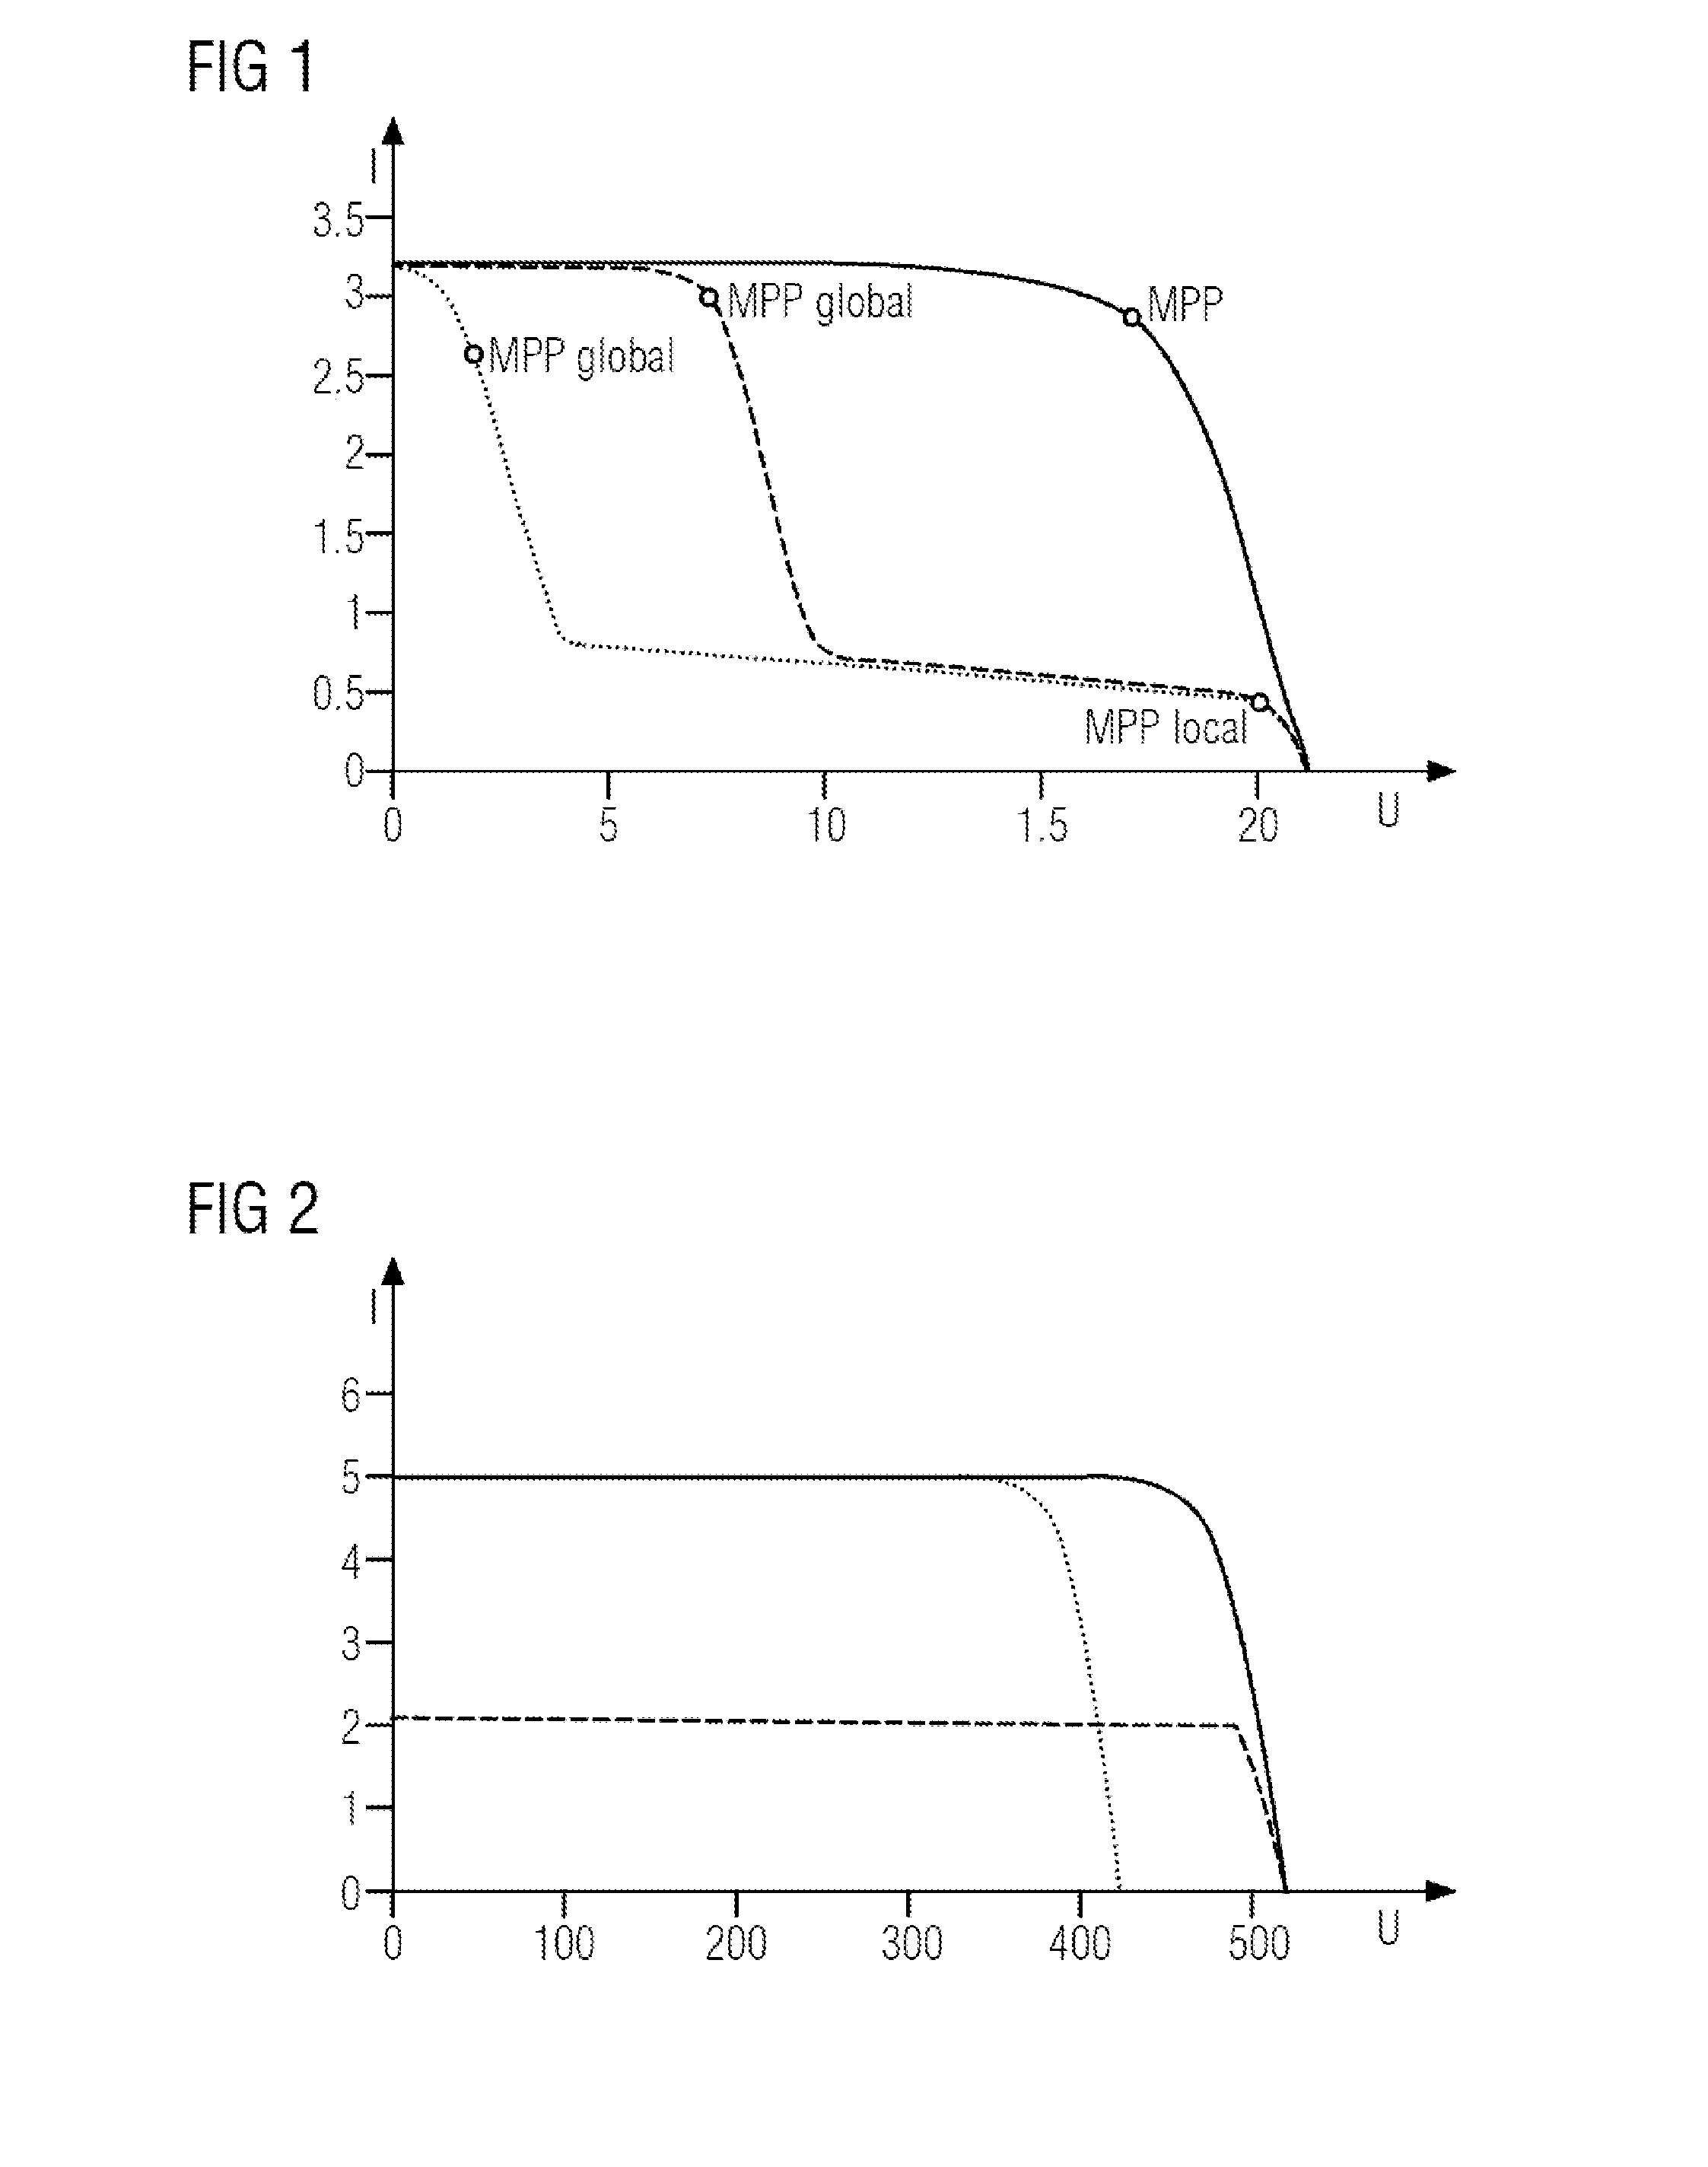 Method for optimizing the yield of a partially shaded photovoltaic array